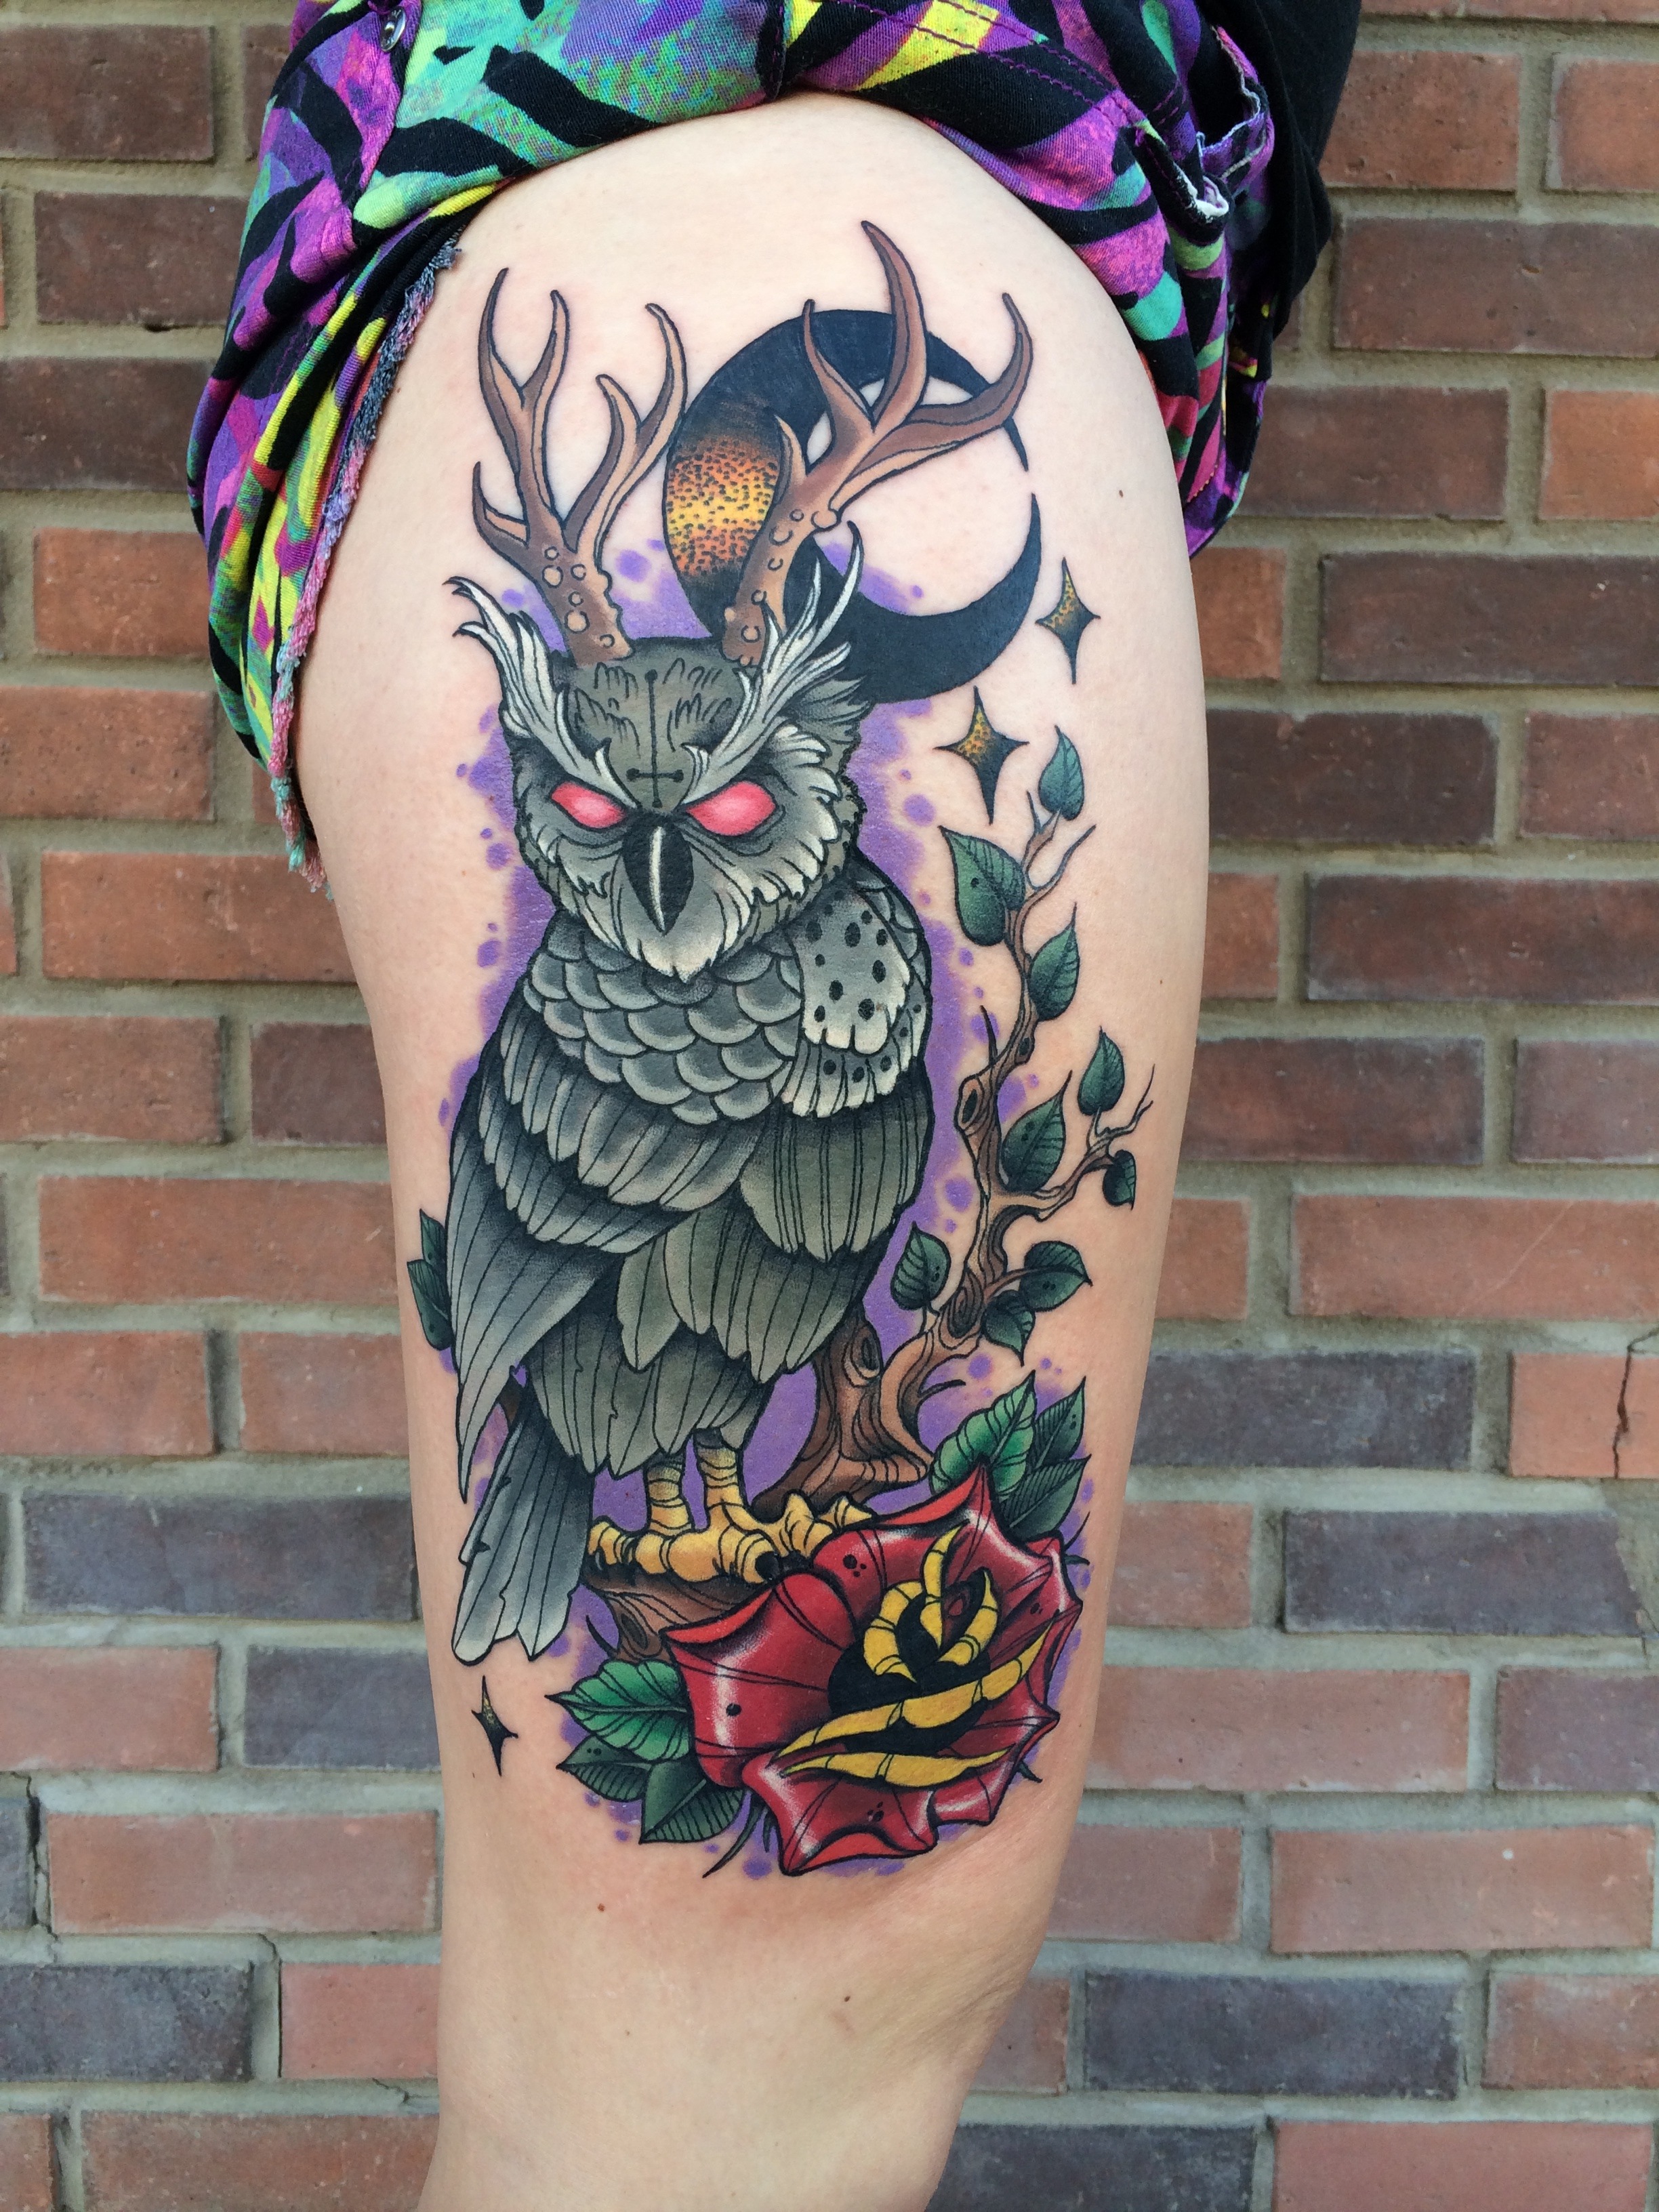  Photo of an owl tattoo, done in an illustrative style